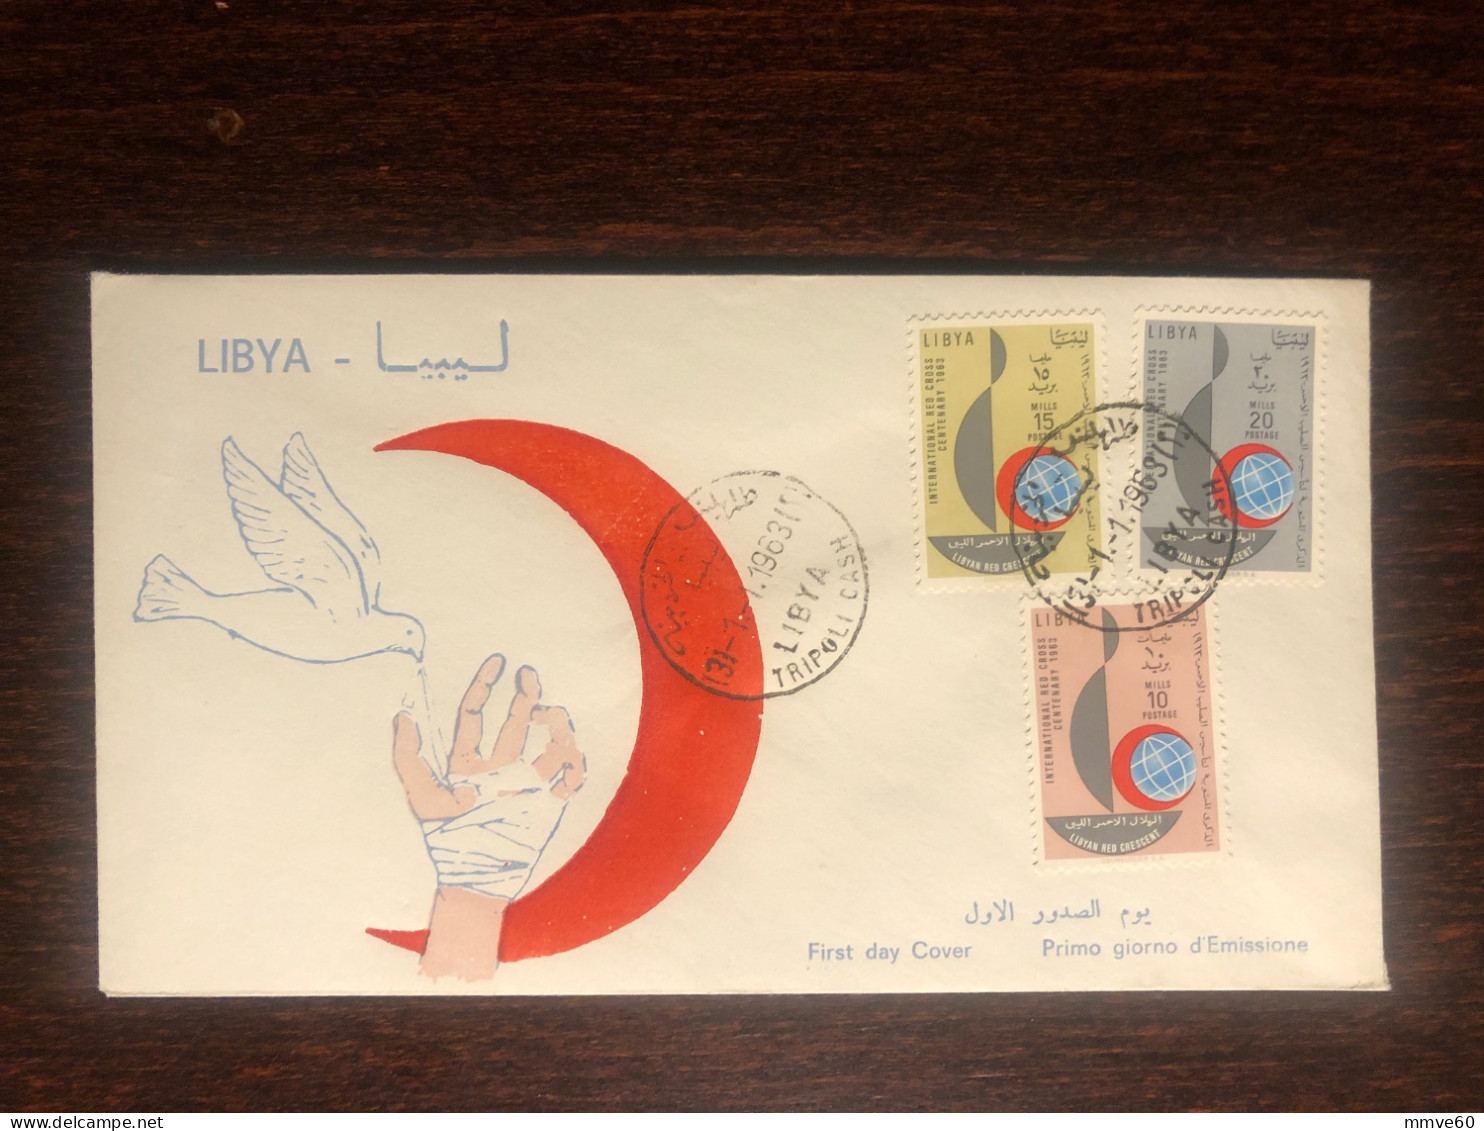 LIBYA  FDC COVER 1963 YEAR RED CRESCENT RED CROSS HEALTH MEDICINE STAMPS - Libia